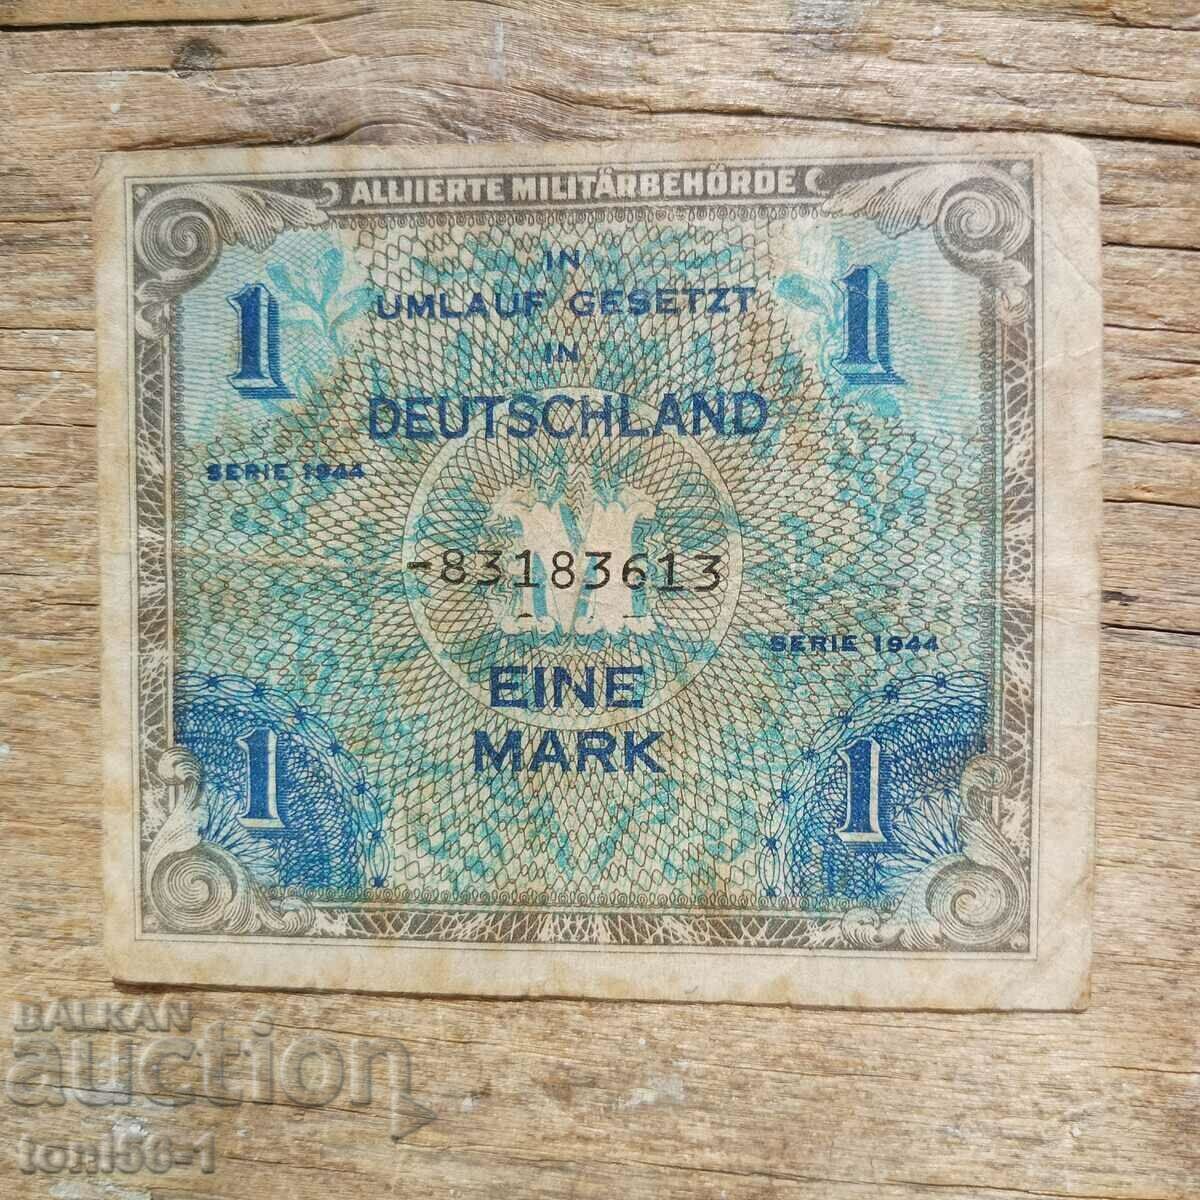 Germany 1 mark 1944, 9 digits in number, no J